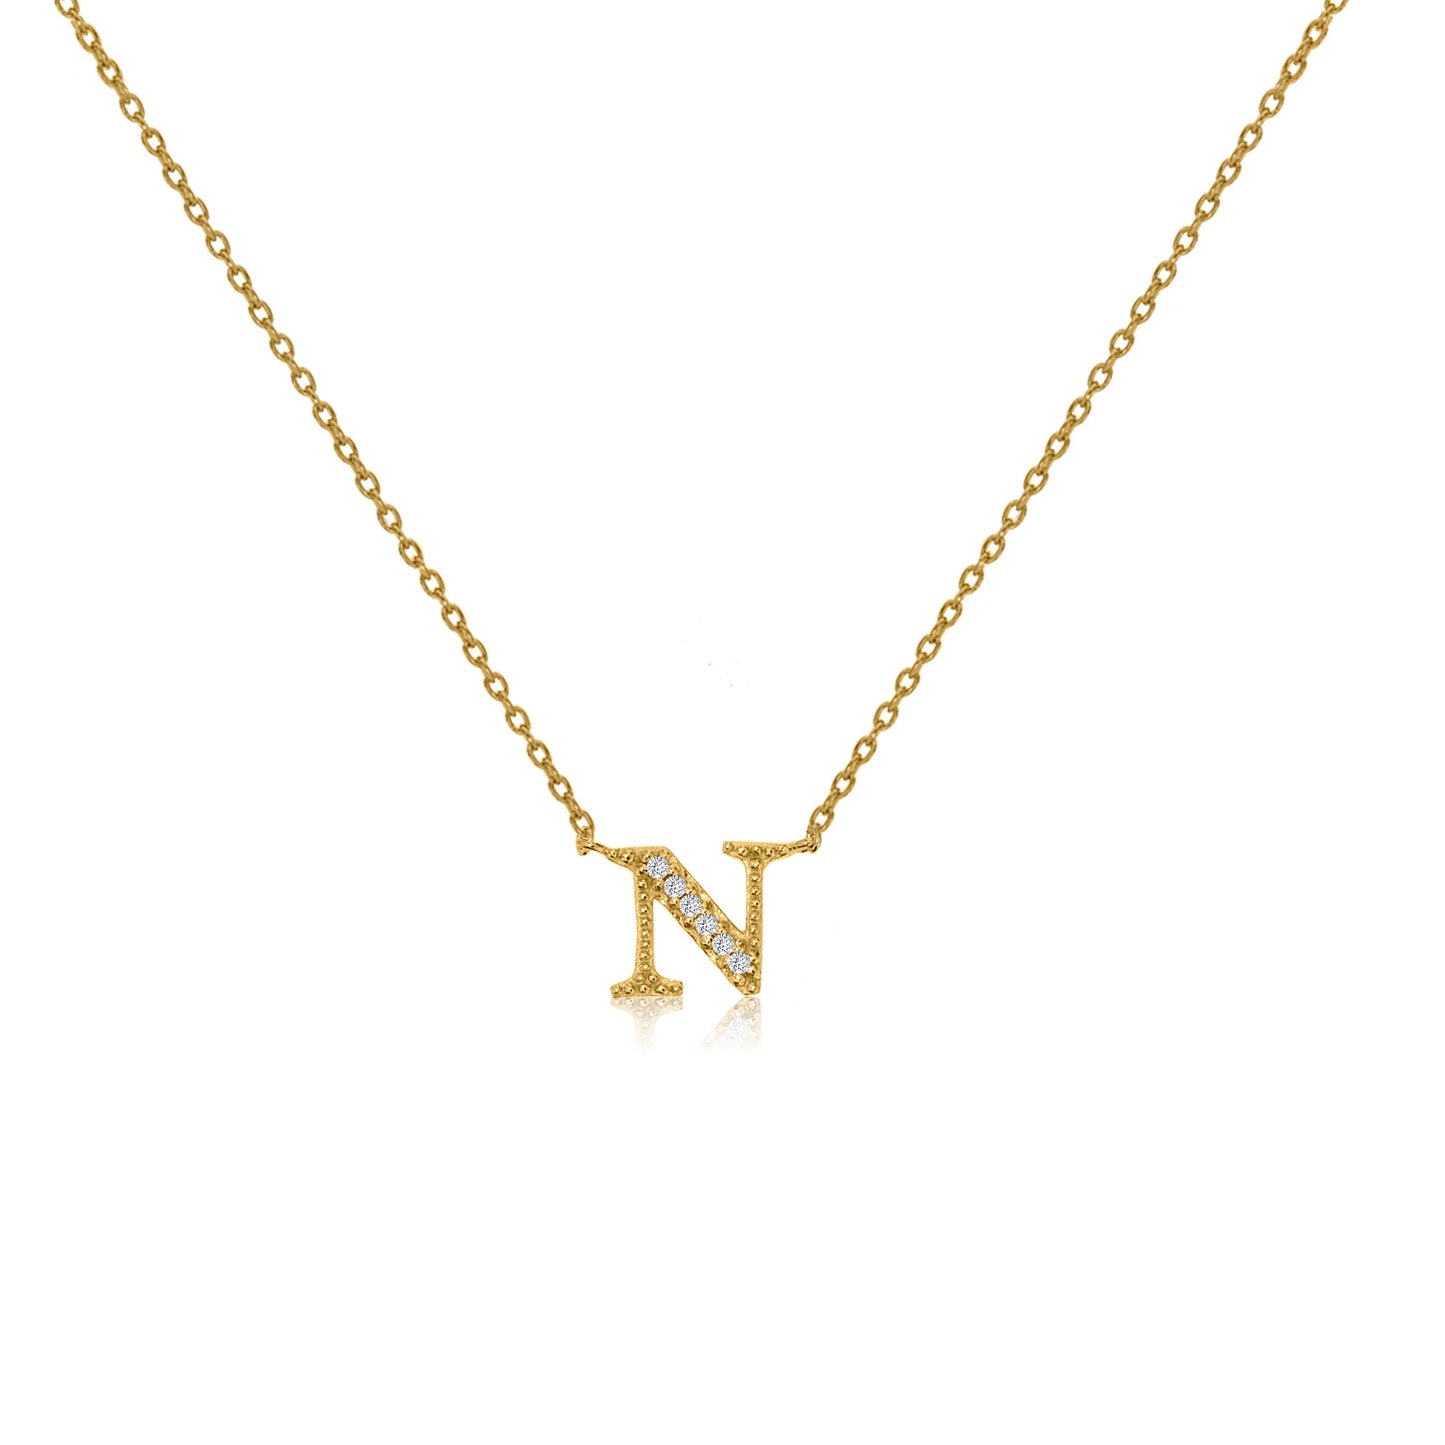 NT-26/G/N -  Initial "N" Necklace with Sliding Length Adjuster